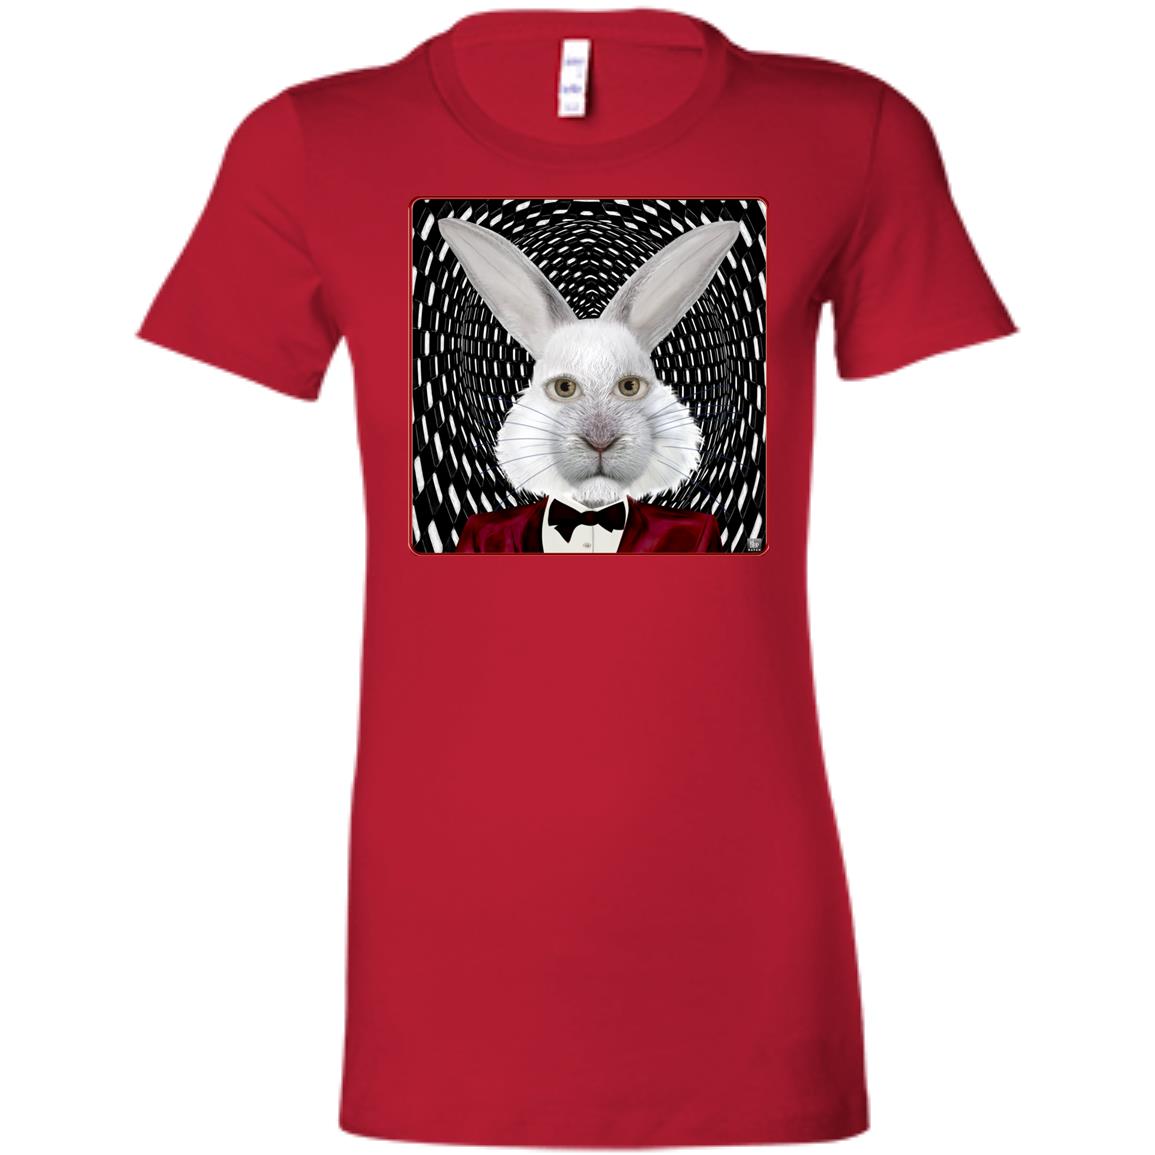 the white rabbit - Women's Fitted T-Shirt